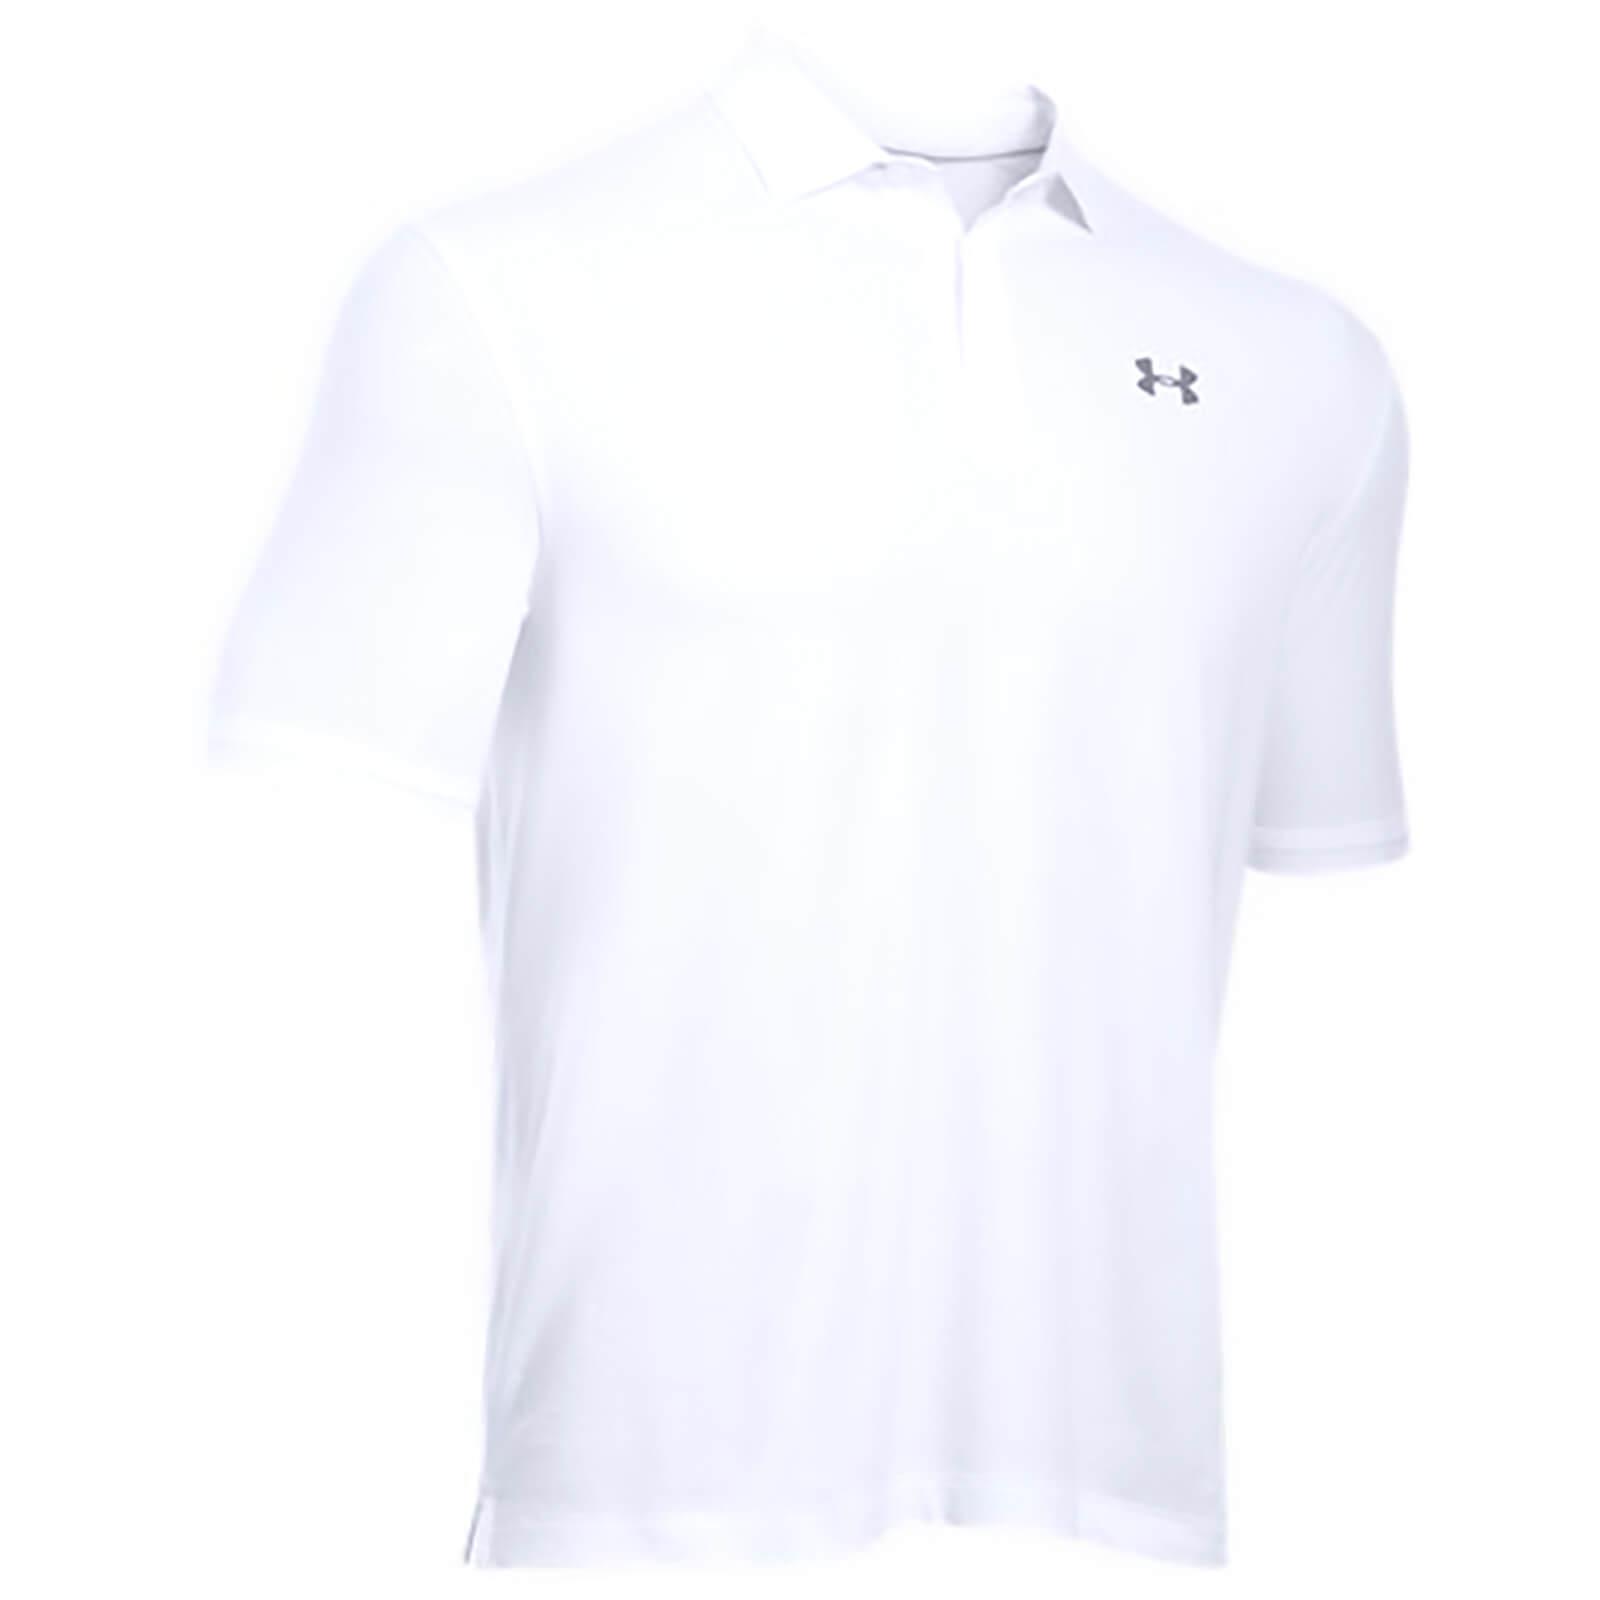 Under Armour Cotton Performance Golf Polo Shirt in White for Men - Lyst